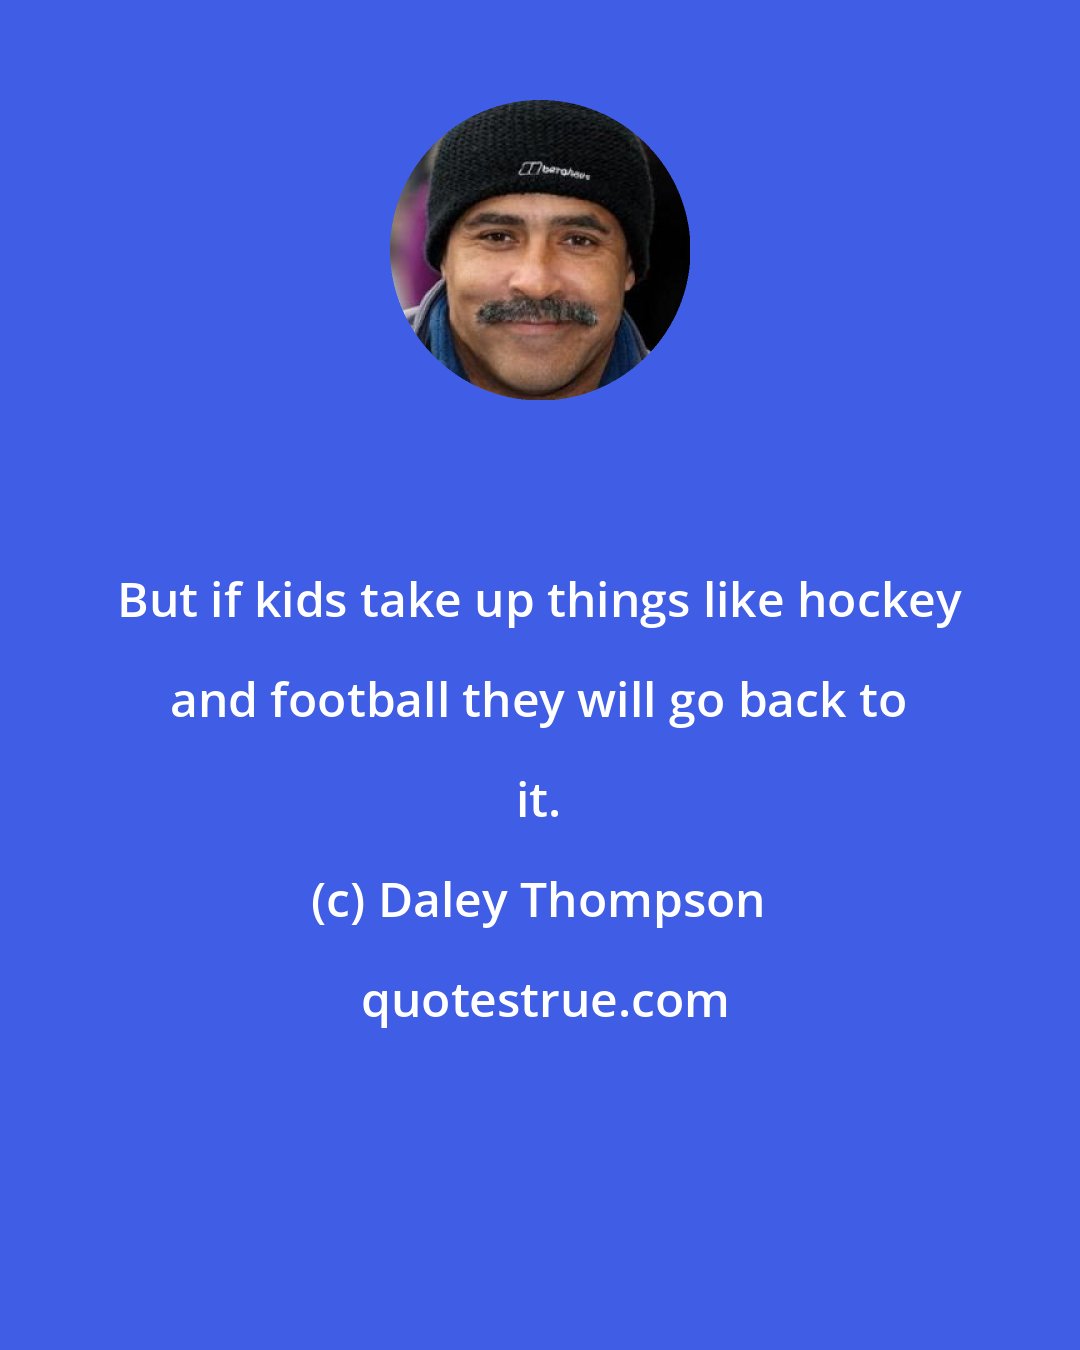 Daley Thompson: But if kids take up things like hockey and football they will go back to it.